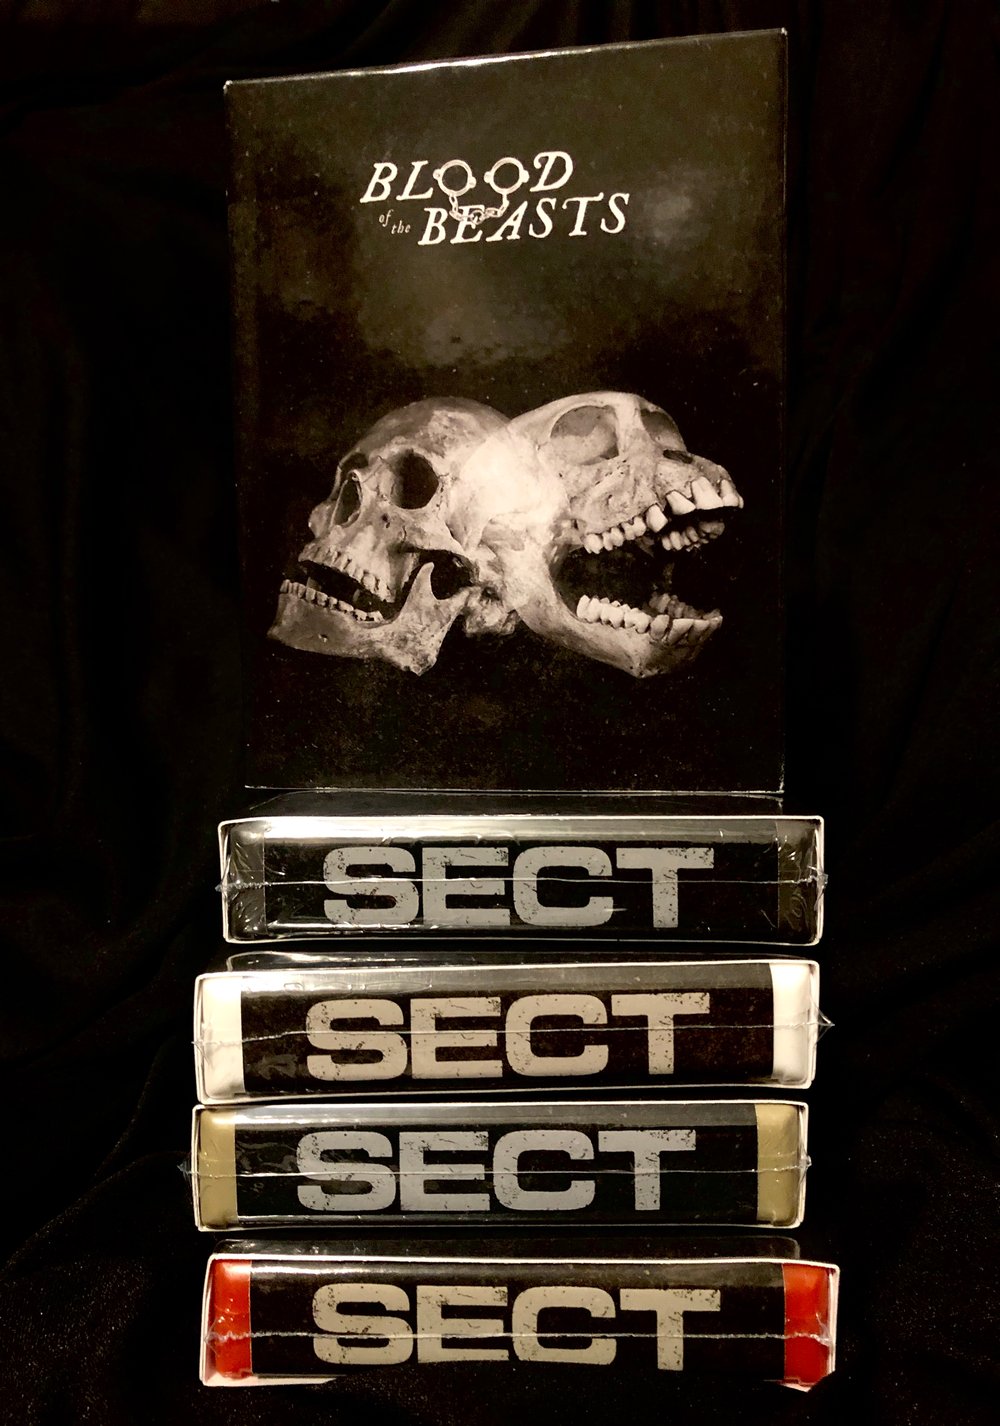 Sect - Blood of the Beasts 8 track 